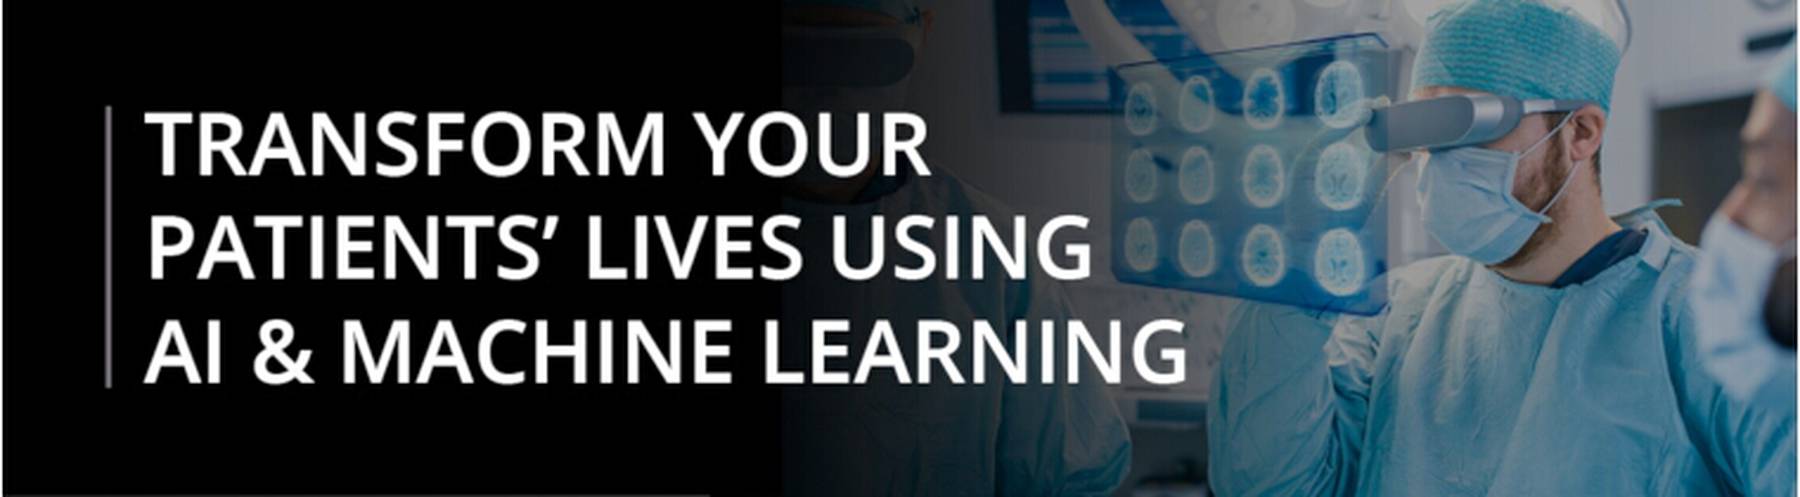 Transform your patients' lives using AI & Machine learning